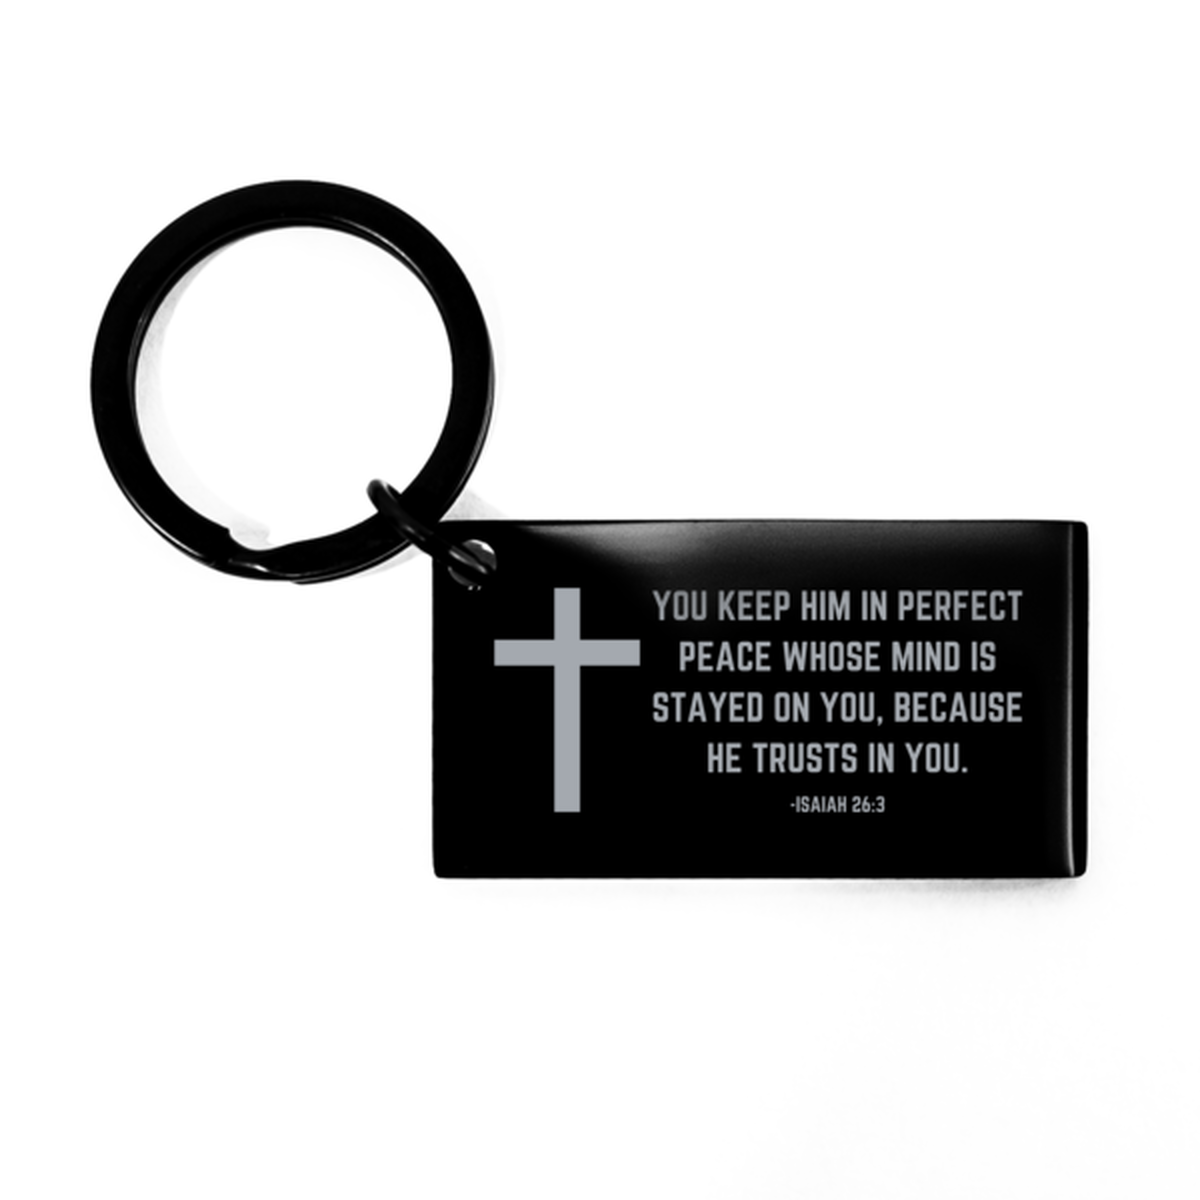 Baptism Gifts For Teenage Boys Girls, Christian Bible Verse Black Keychain, You keep him in perfect peace, Confirmation Gifts, Bible Verse Keyring for Son, Godson, Grandson, Nephew